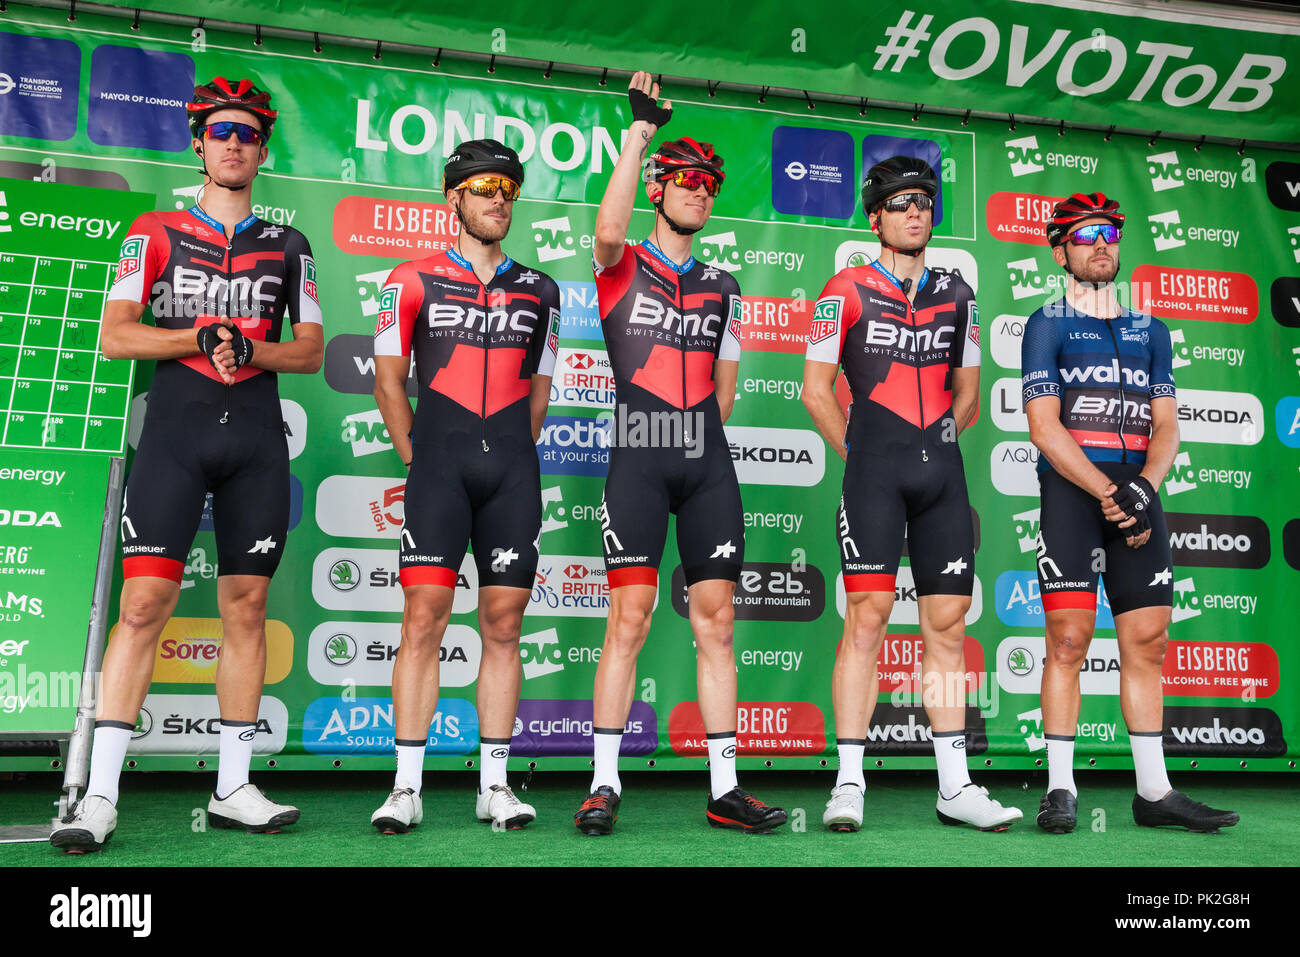 London, UK. 9th September, 2018. Riders from the BMC Racing team are presented before the 77km London Stage (Stage 8) of the OVO Energy Tour of Britain cycle race. Credit: Mark Kerrison/Alamy Live News Stock Photo